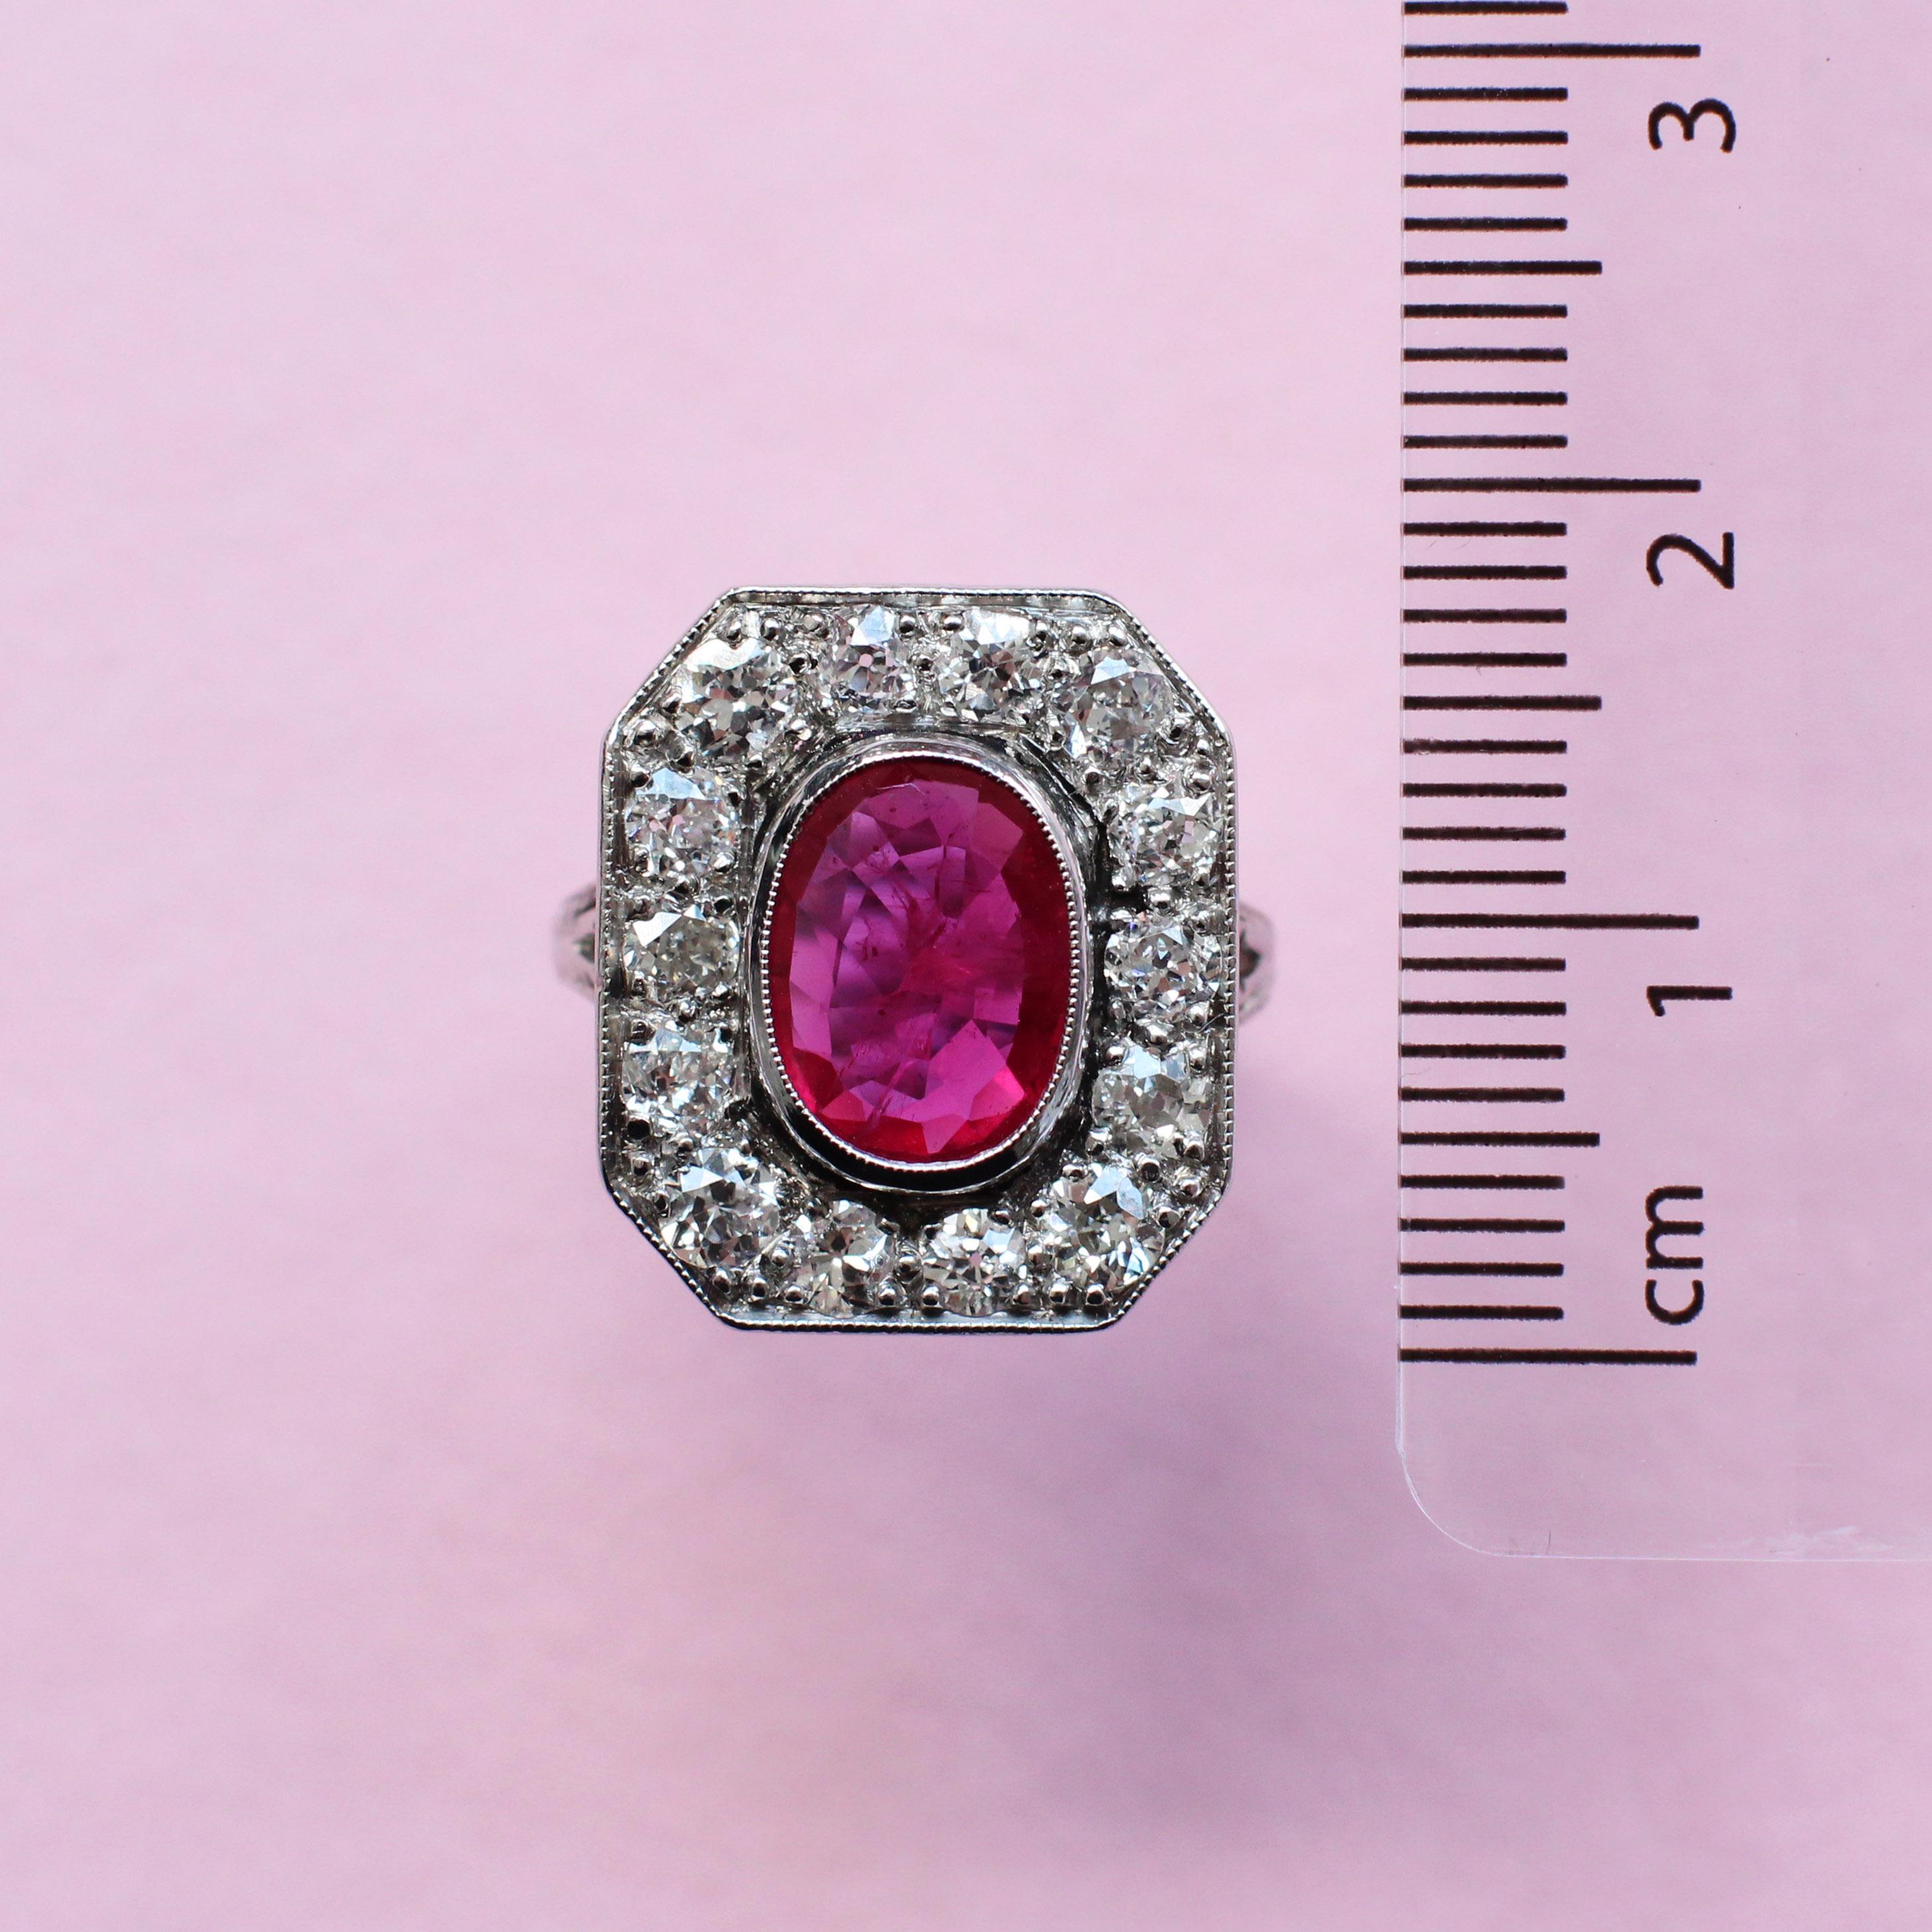 The mesmerising octagon ruby at the centre of this unique vintage-style ring was specially selected by a member of the Haruni family and sits resplendent within a circle of round brilliant diamonds. Its pinkish red colour contrasts not only with the